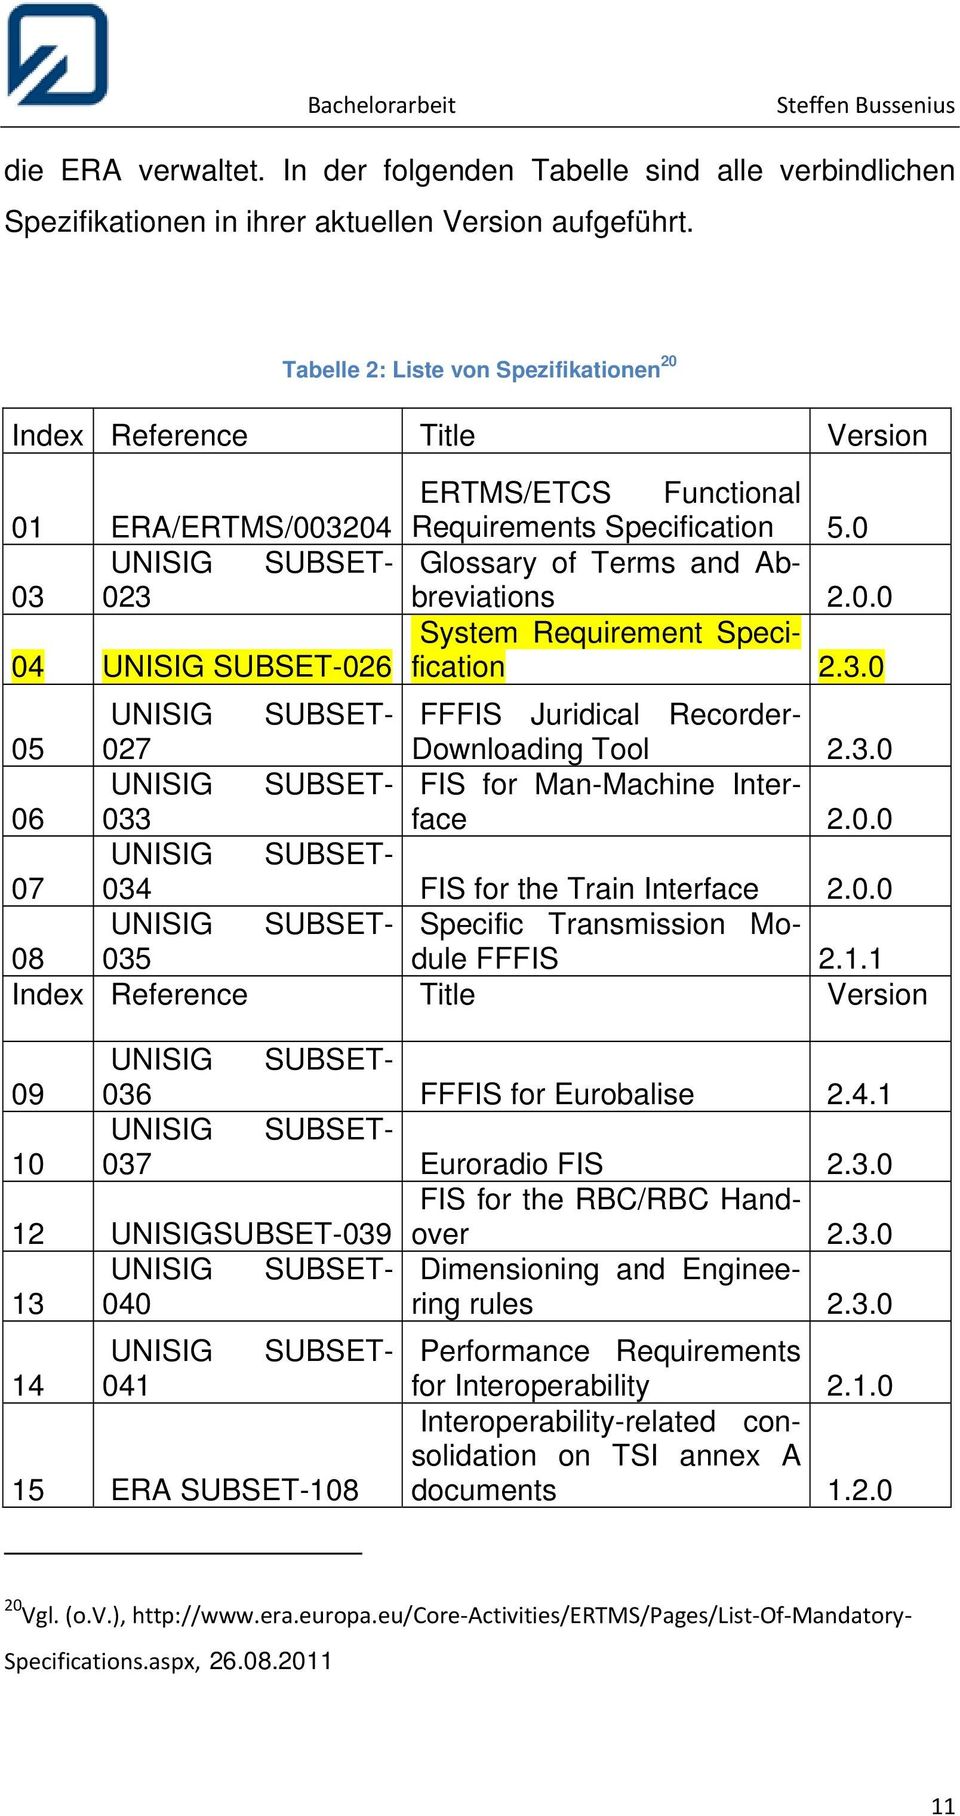 0 UNISIG SUBSET- Glossary of Terms and Abbreviations 03 023 2.0.0 04 UNISIG SUBSET-026 System Requirement Specification 2.3.0 UNISIG SUBSET- FFFIS Juridical Recorder- 05 027 Downloading Tool 2.3.0 UNISIG SUBSET- FIS for Man-Machine Interface 2.